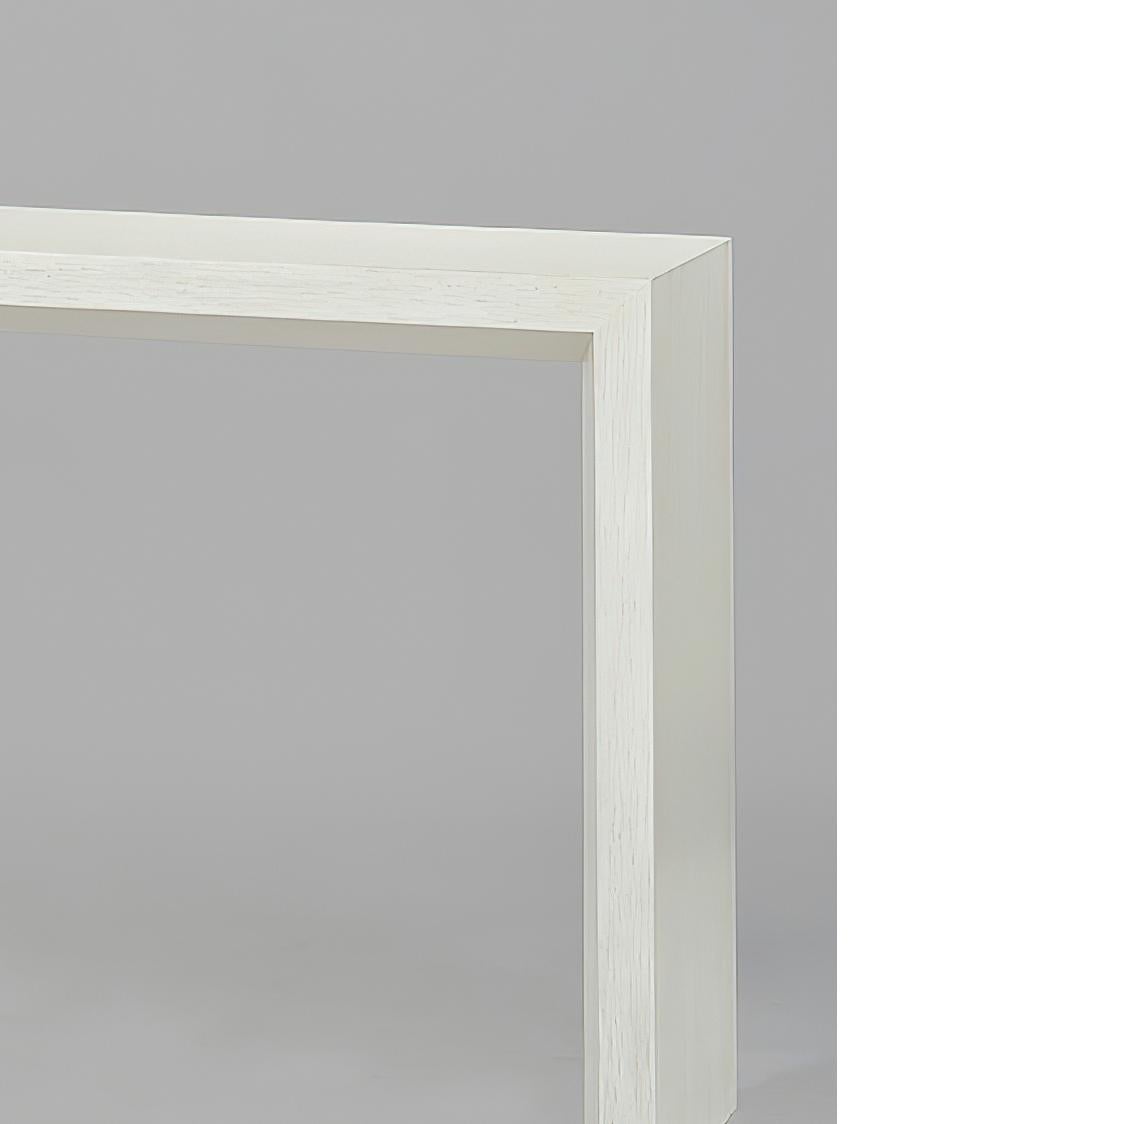 Modern painted console table with a beveled shape on the inside legs and lower side of the top, and a “drift” white painted finish with subtle grey distressing.

Dimensions: 64